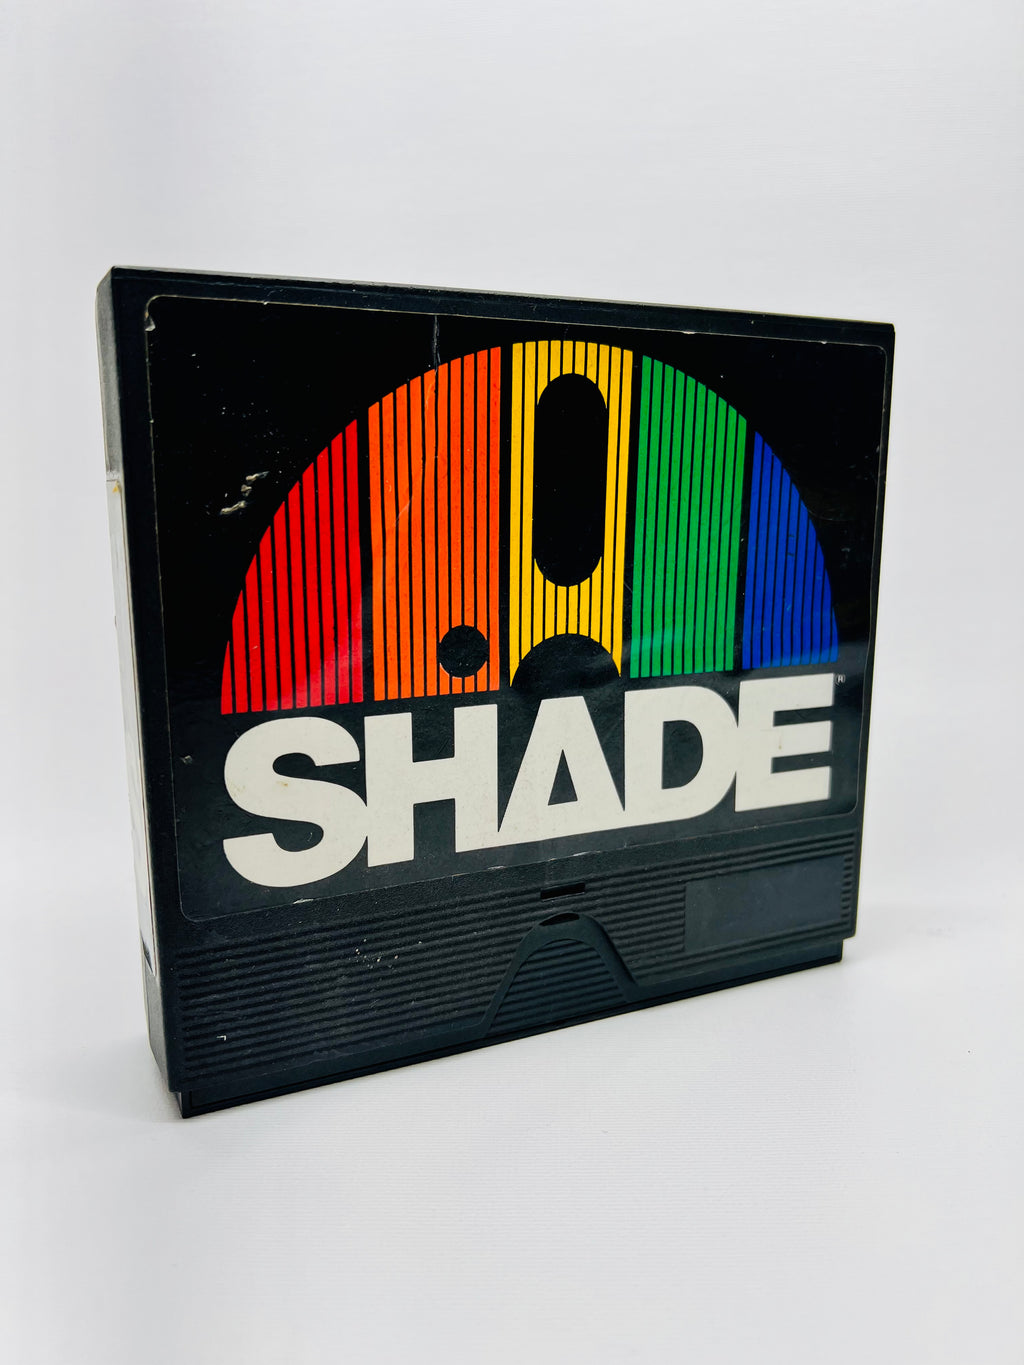 Shade Floppy Disks and Cute Case